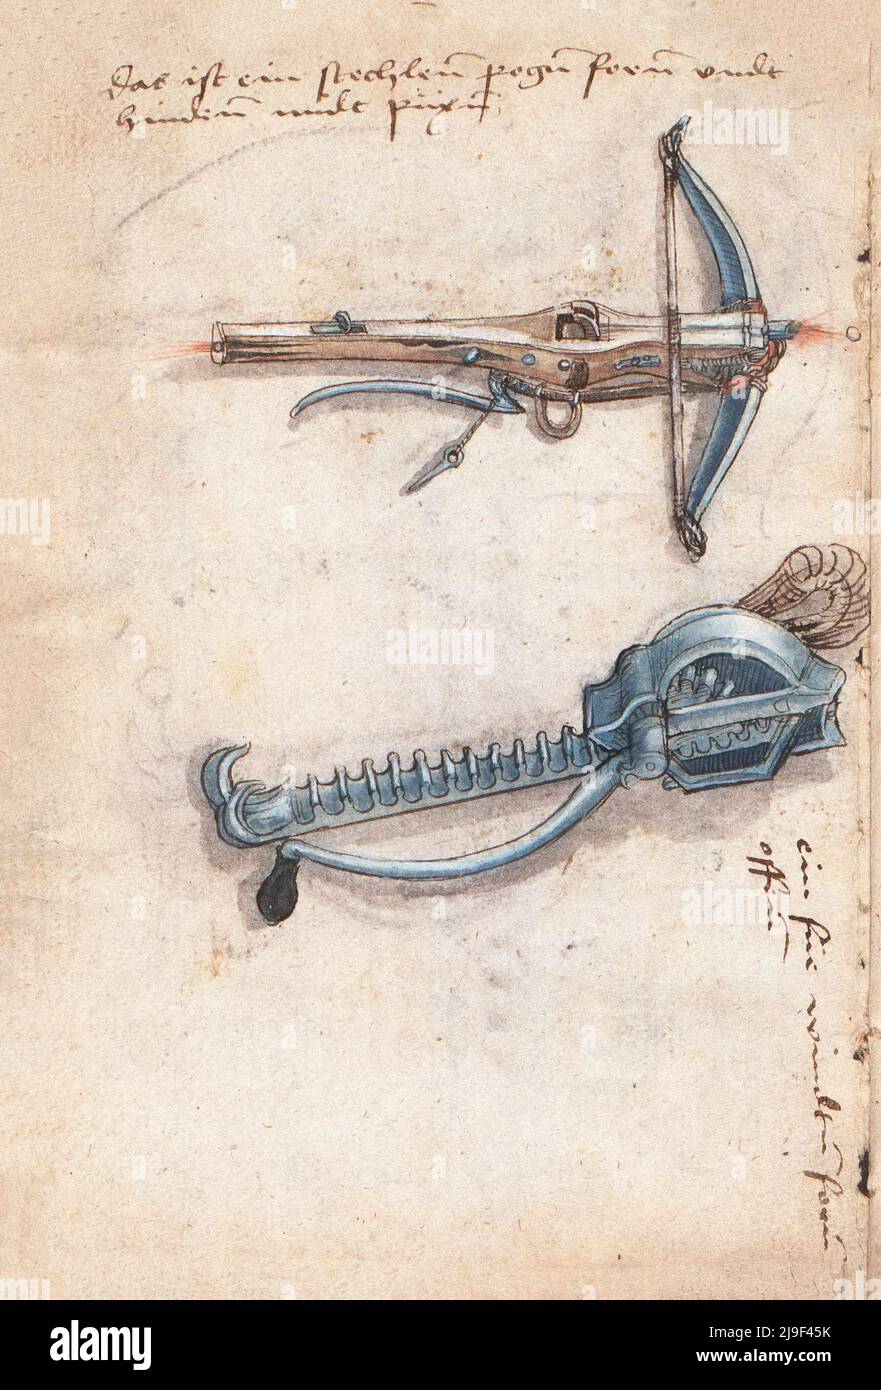 Medieval illustration of crossbow and crossbow's iron cranequin. The tools of Martin Löffelholz (1505) Löffelholtz Codex. Illustrations and descriptio Stock Photo